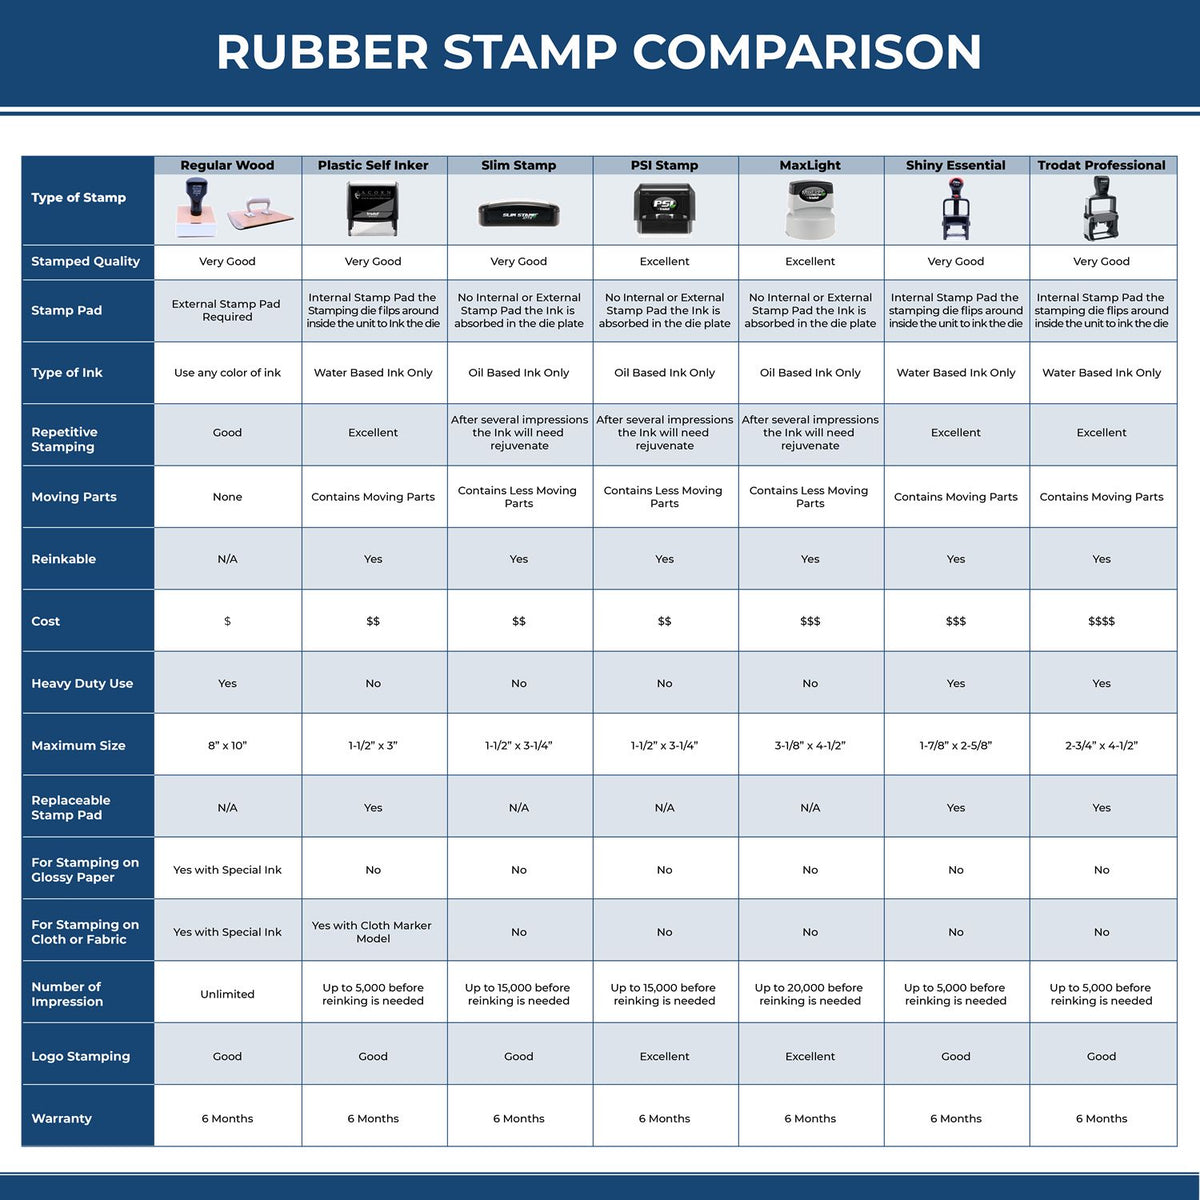 Narrow Void Rubber Stamp 4753R Rubber Stamp Comparison